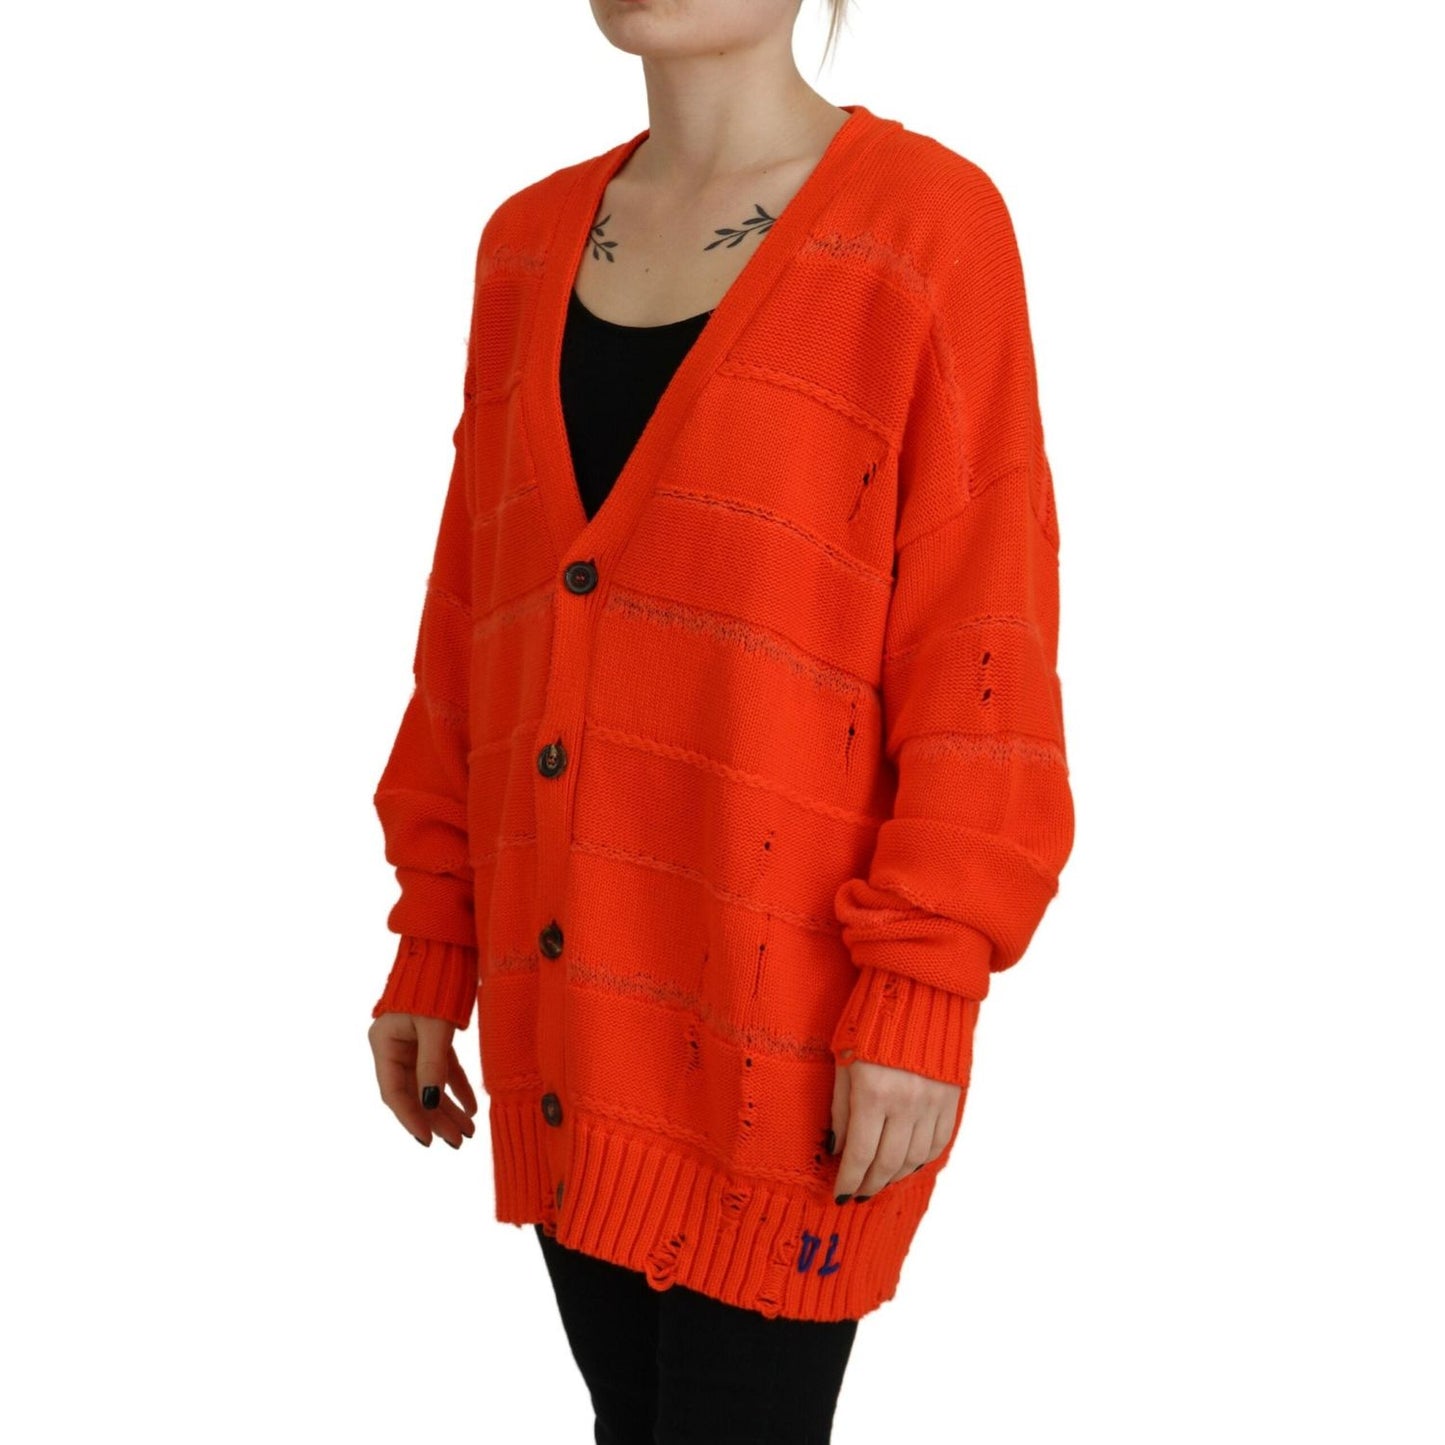 Dsquared² Orange Cotton Knitted Buttoned Cardigan Sweater orange-cotton-knitted-buttoned-cardigan-sweater